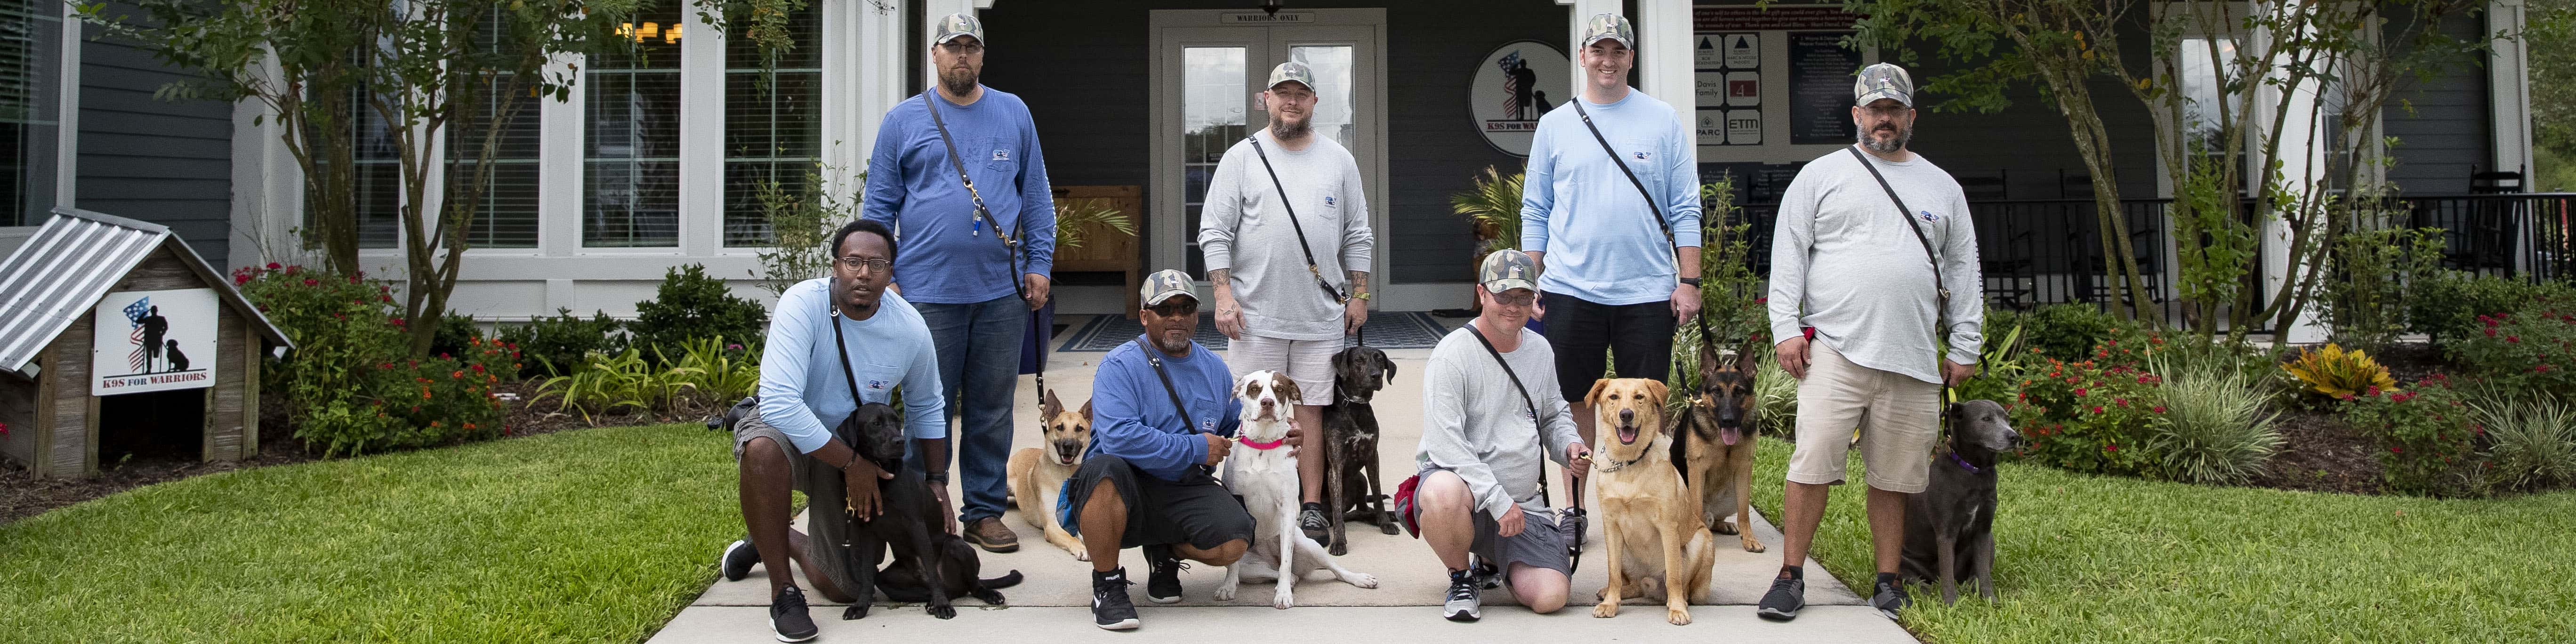 Veterans posing with their K9s